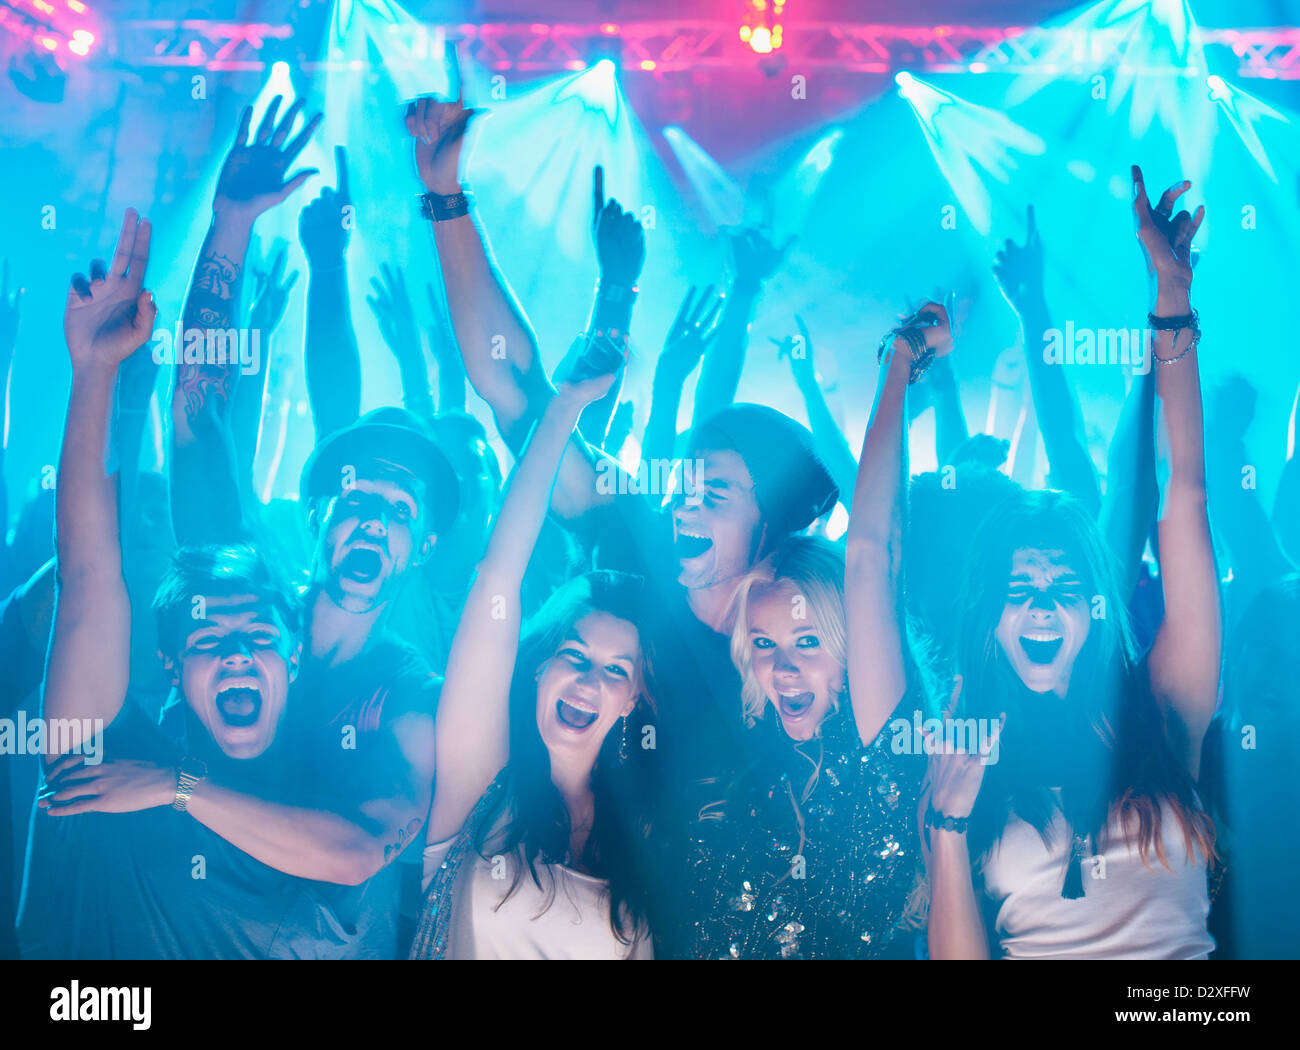 Portrait of enthusiastic crowd with arms raised at concert Stock Photo